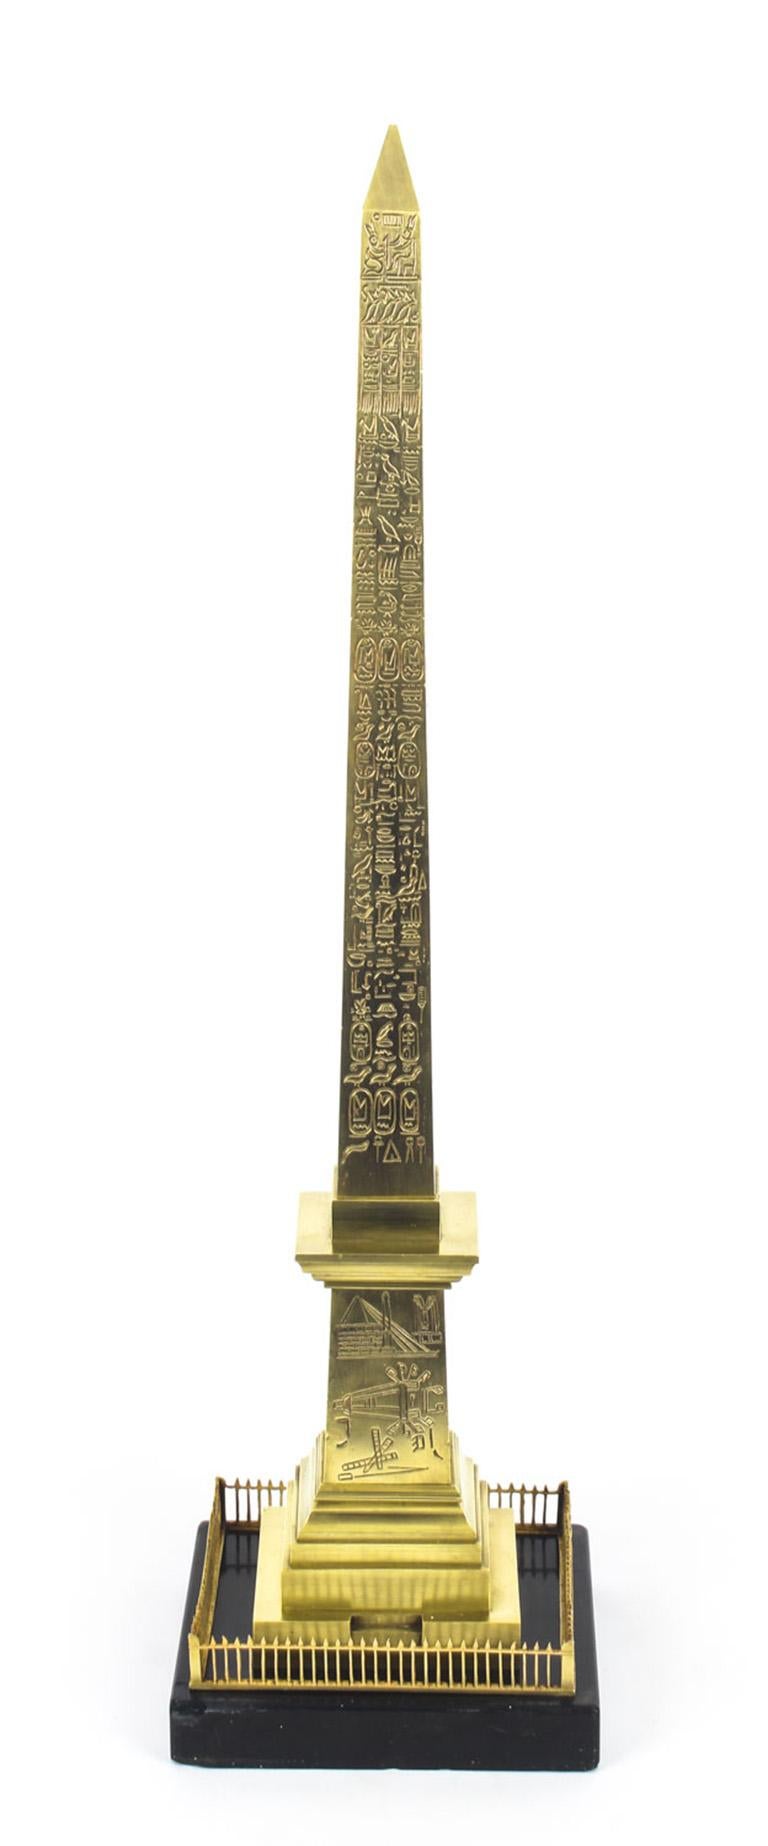 This is a fine large antique French Grand Tour ormolu model of The Luxor Obelisk c.1850 in date.
 
The obelisk is a model of The Luxor Obelisk which is over 3,000 years old and was originally situated outside the Luxor Temple, where its twin